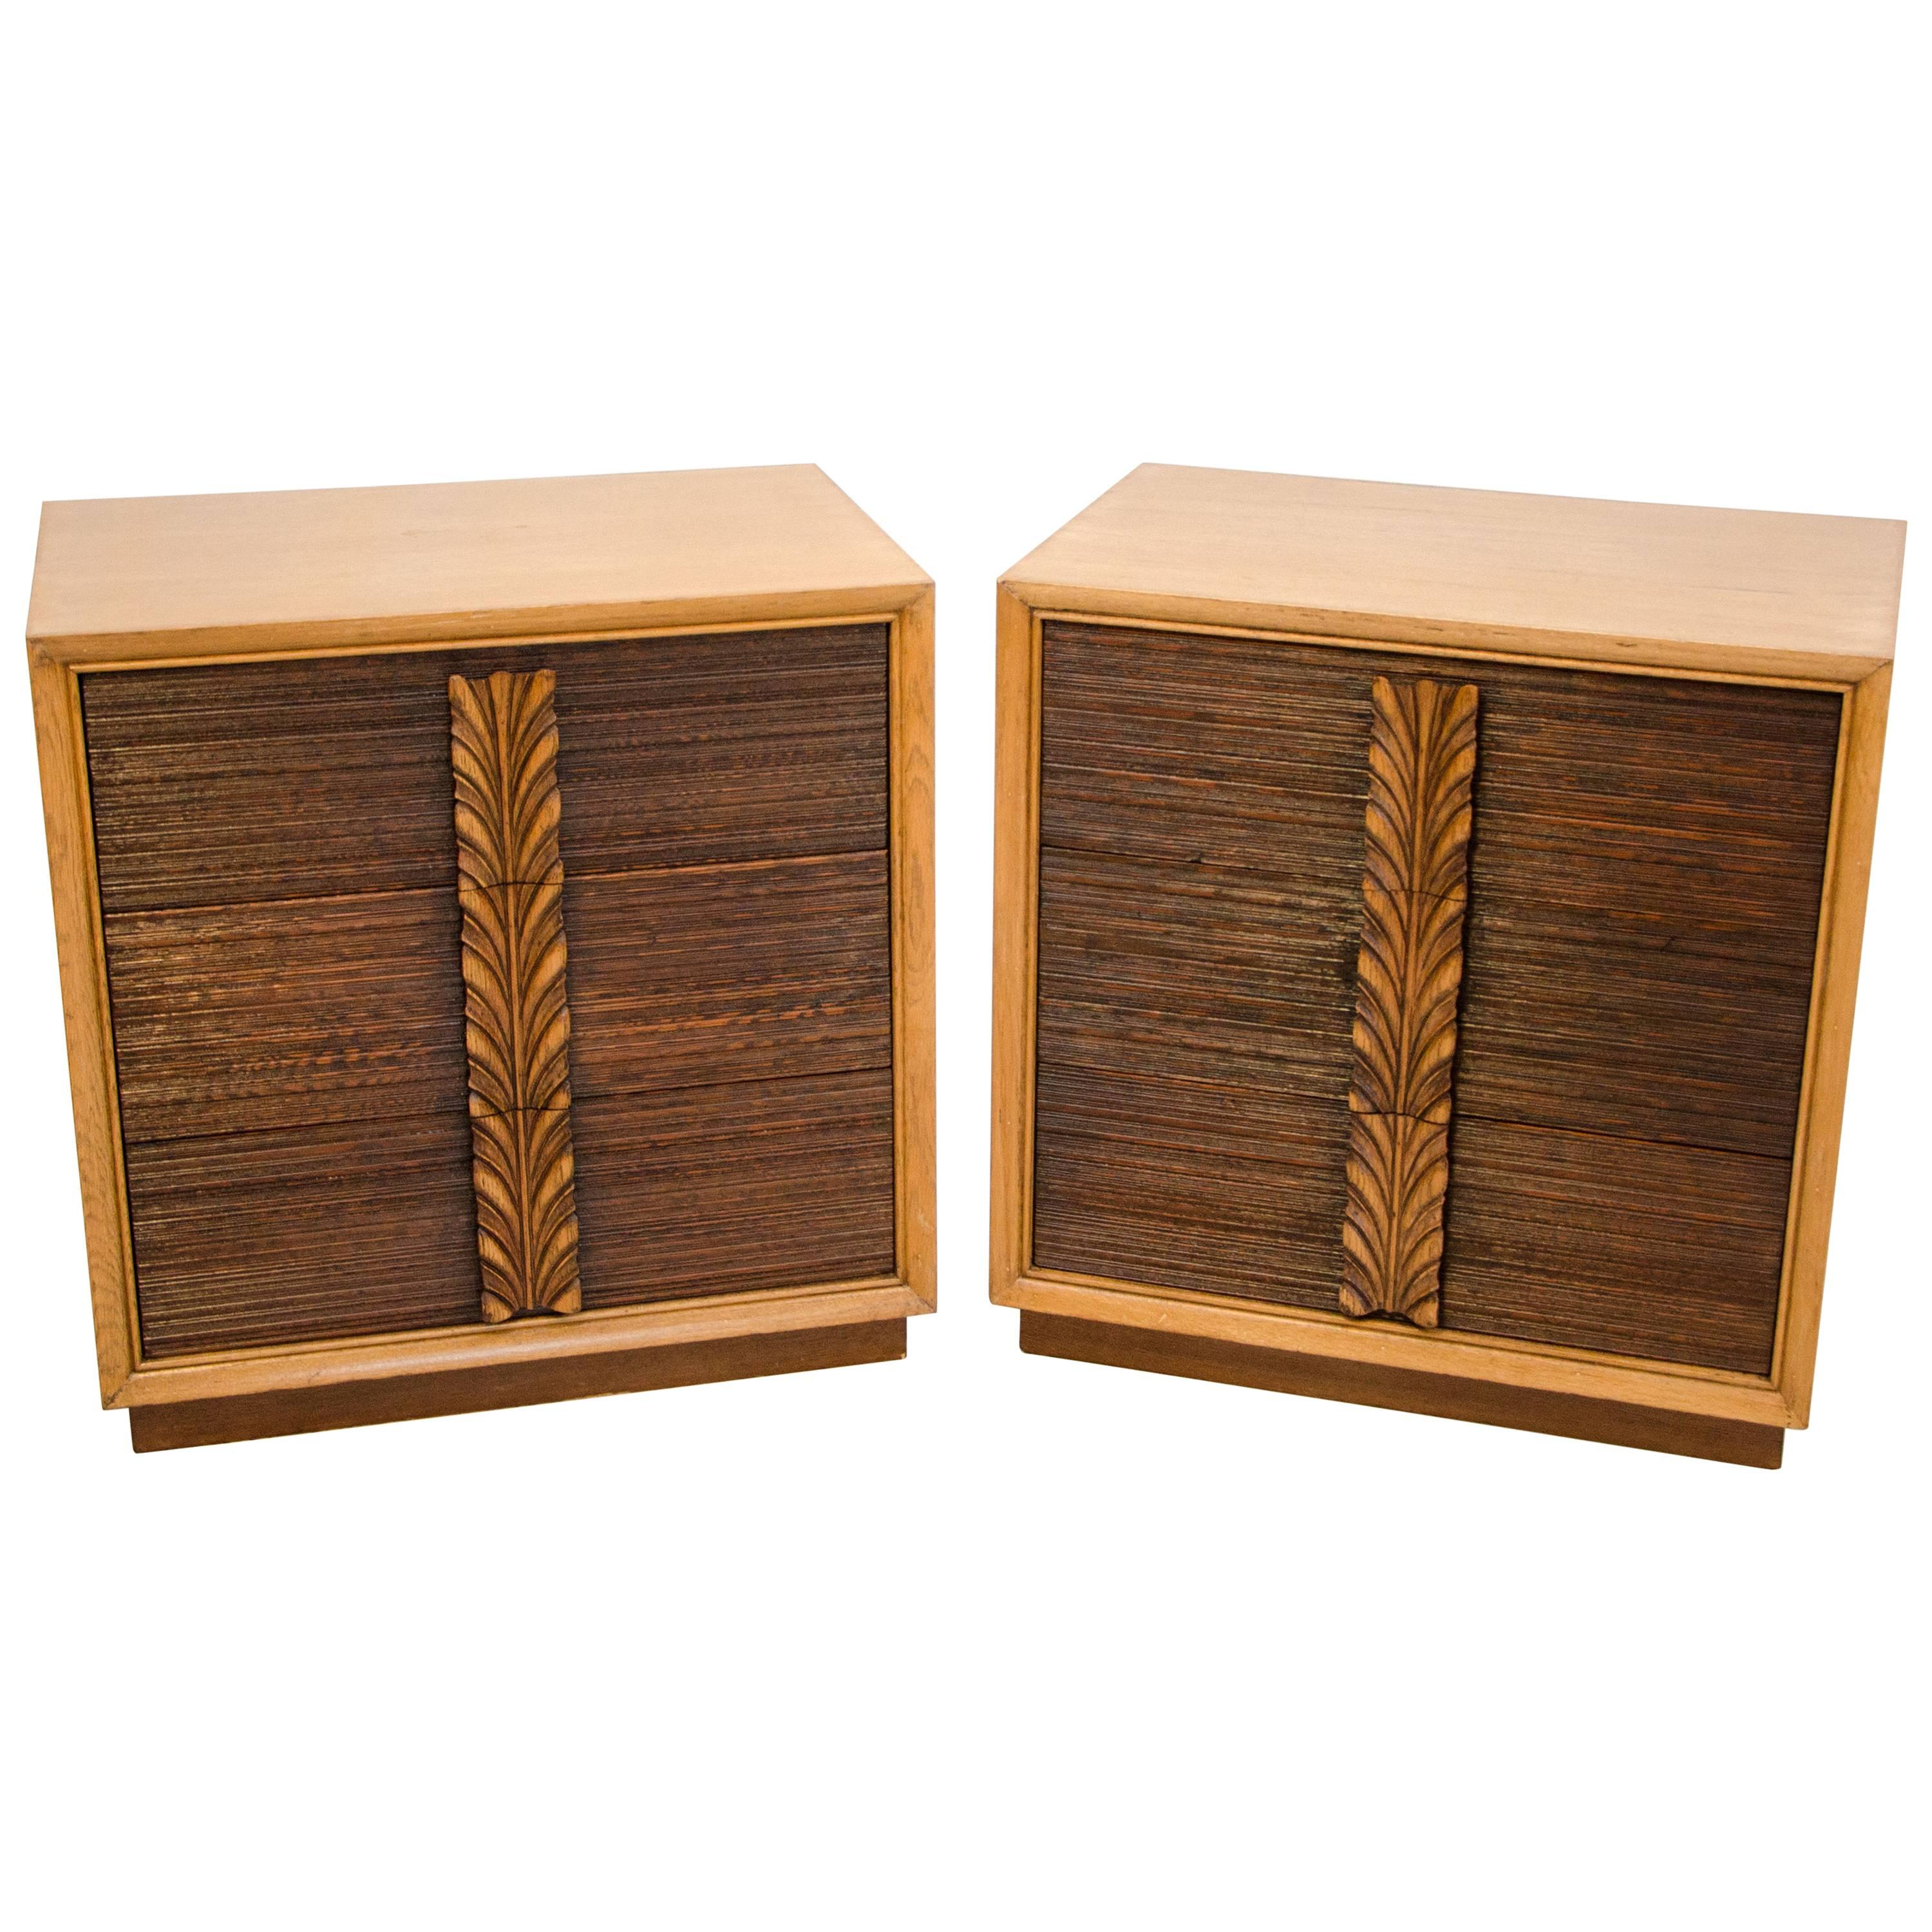 Pair of Carr-Oaken Chests or Small Dressers, Paul Frankl Style